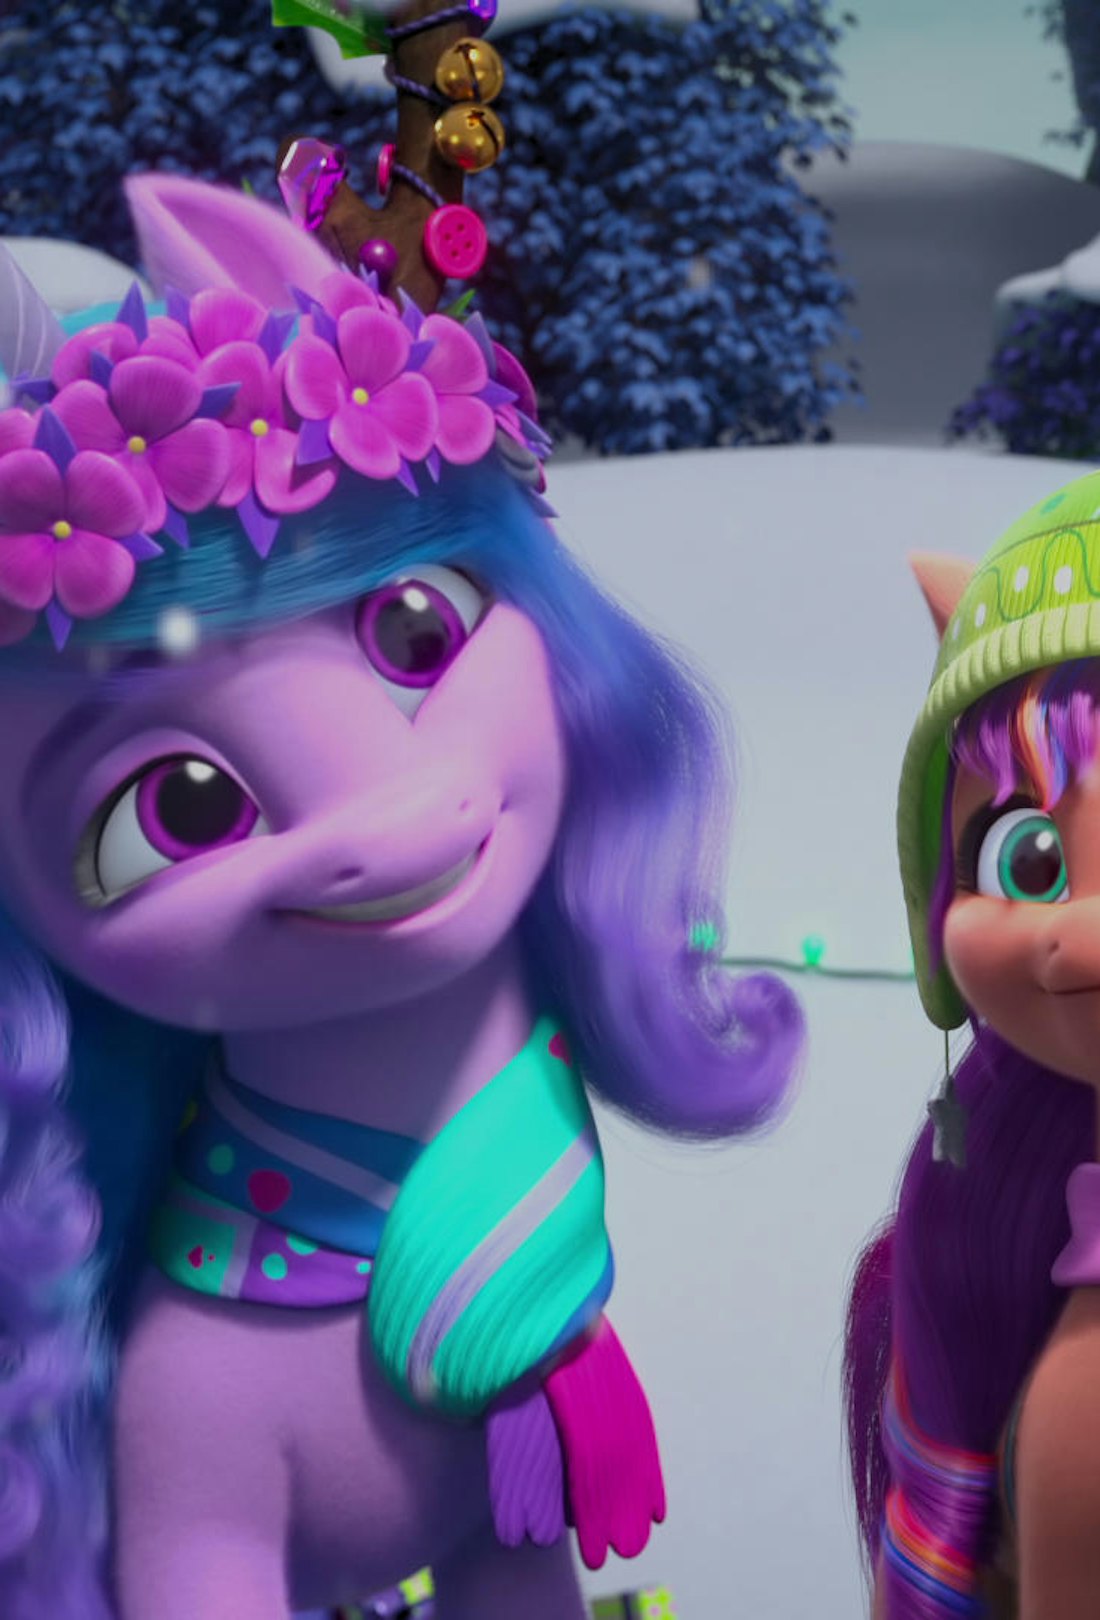 The ponies celebrate the holidays in 'My Little Pony: Winter Wish Day.'